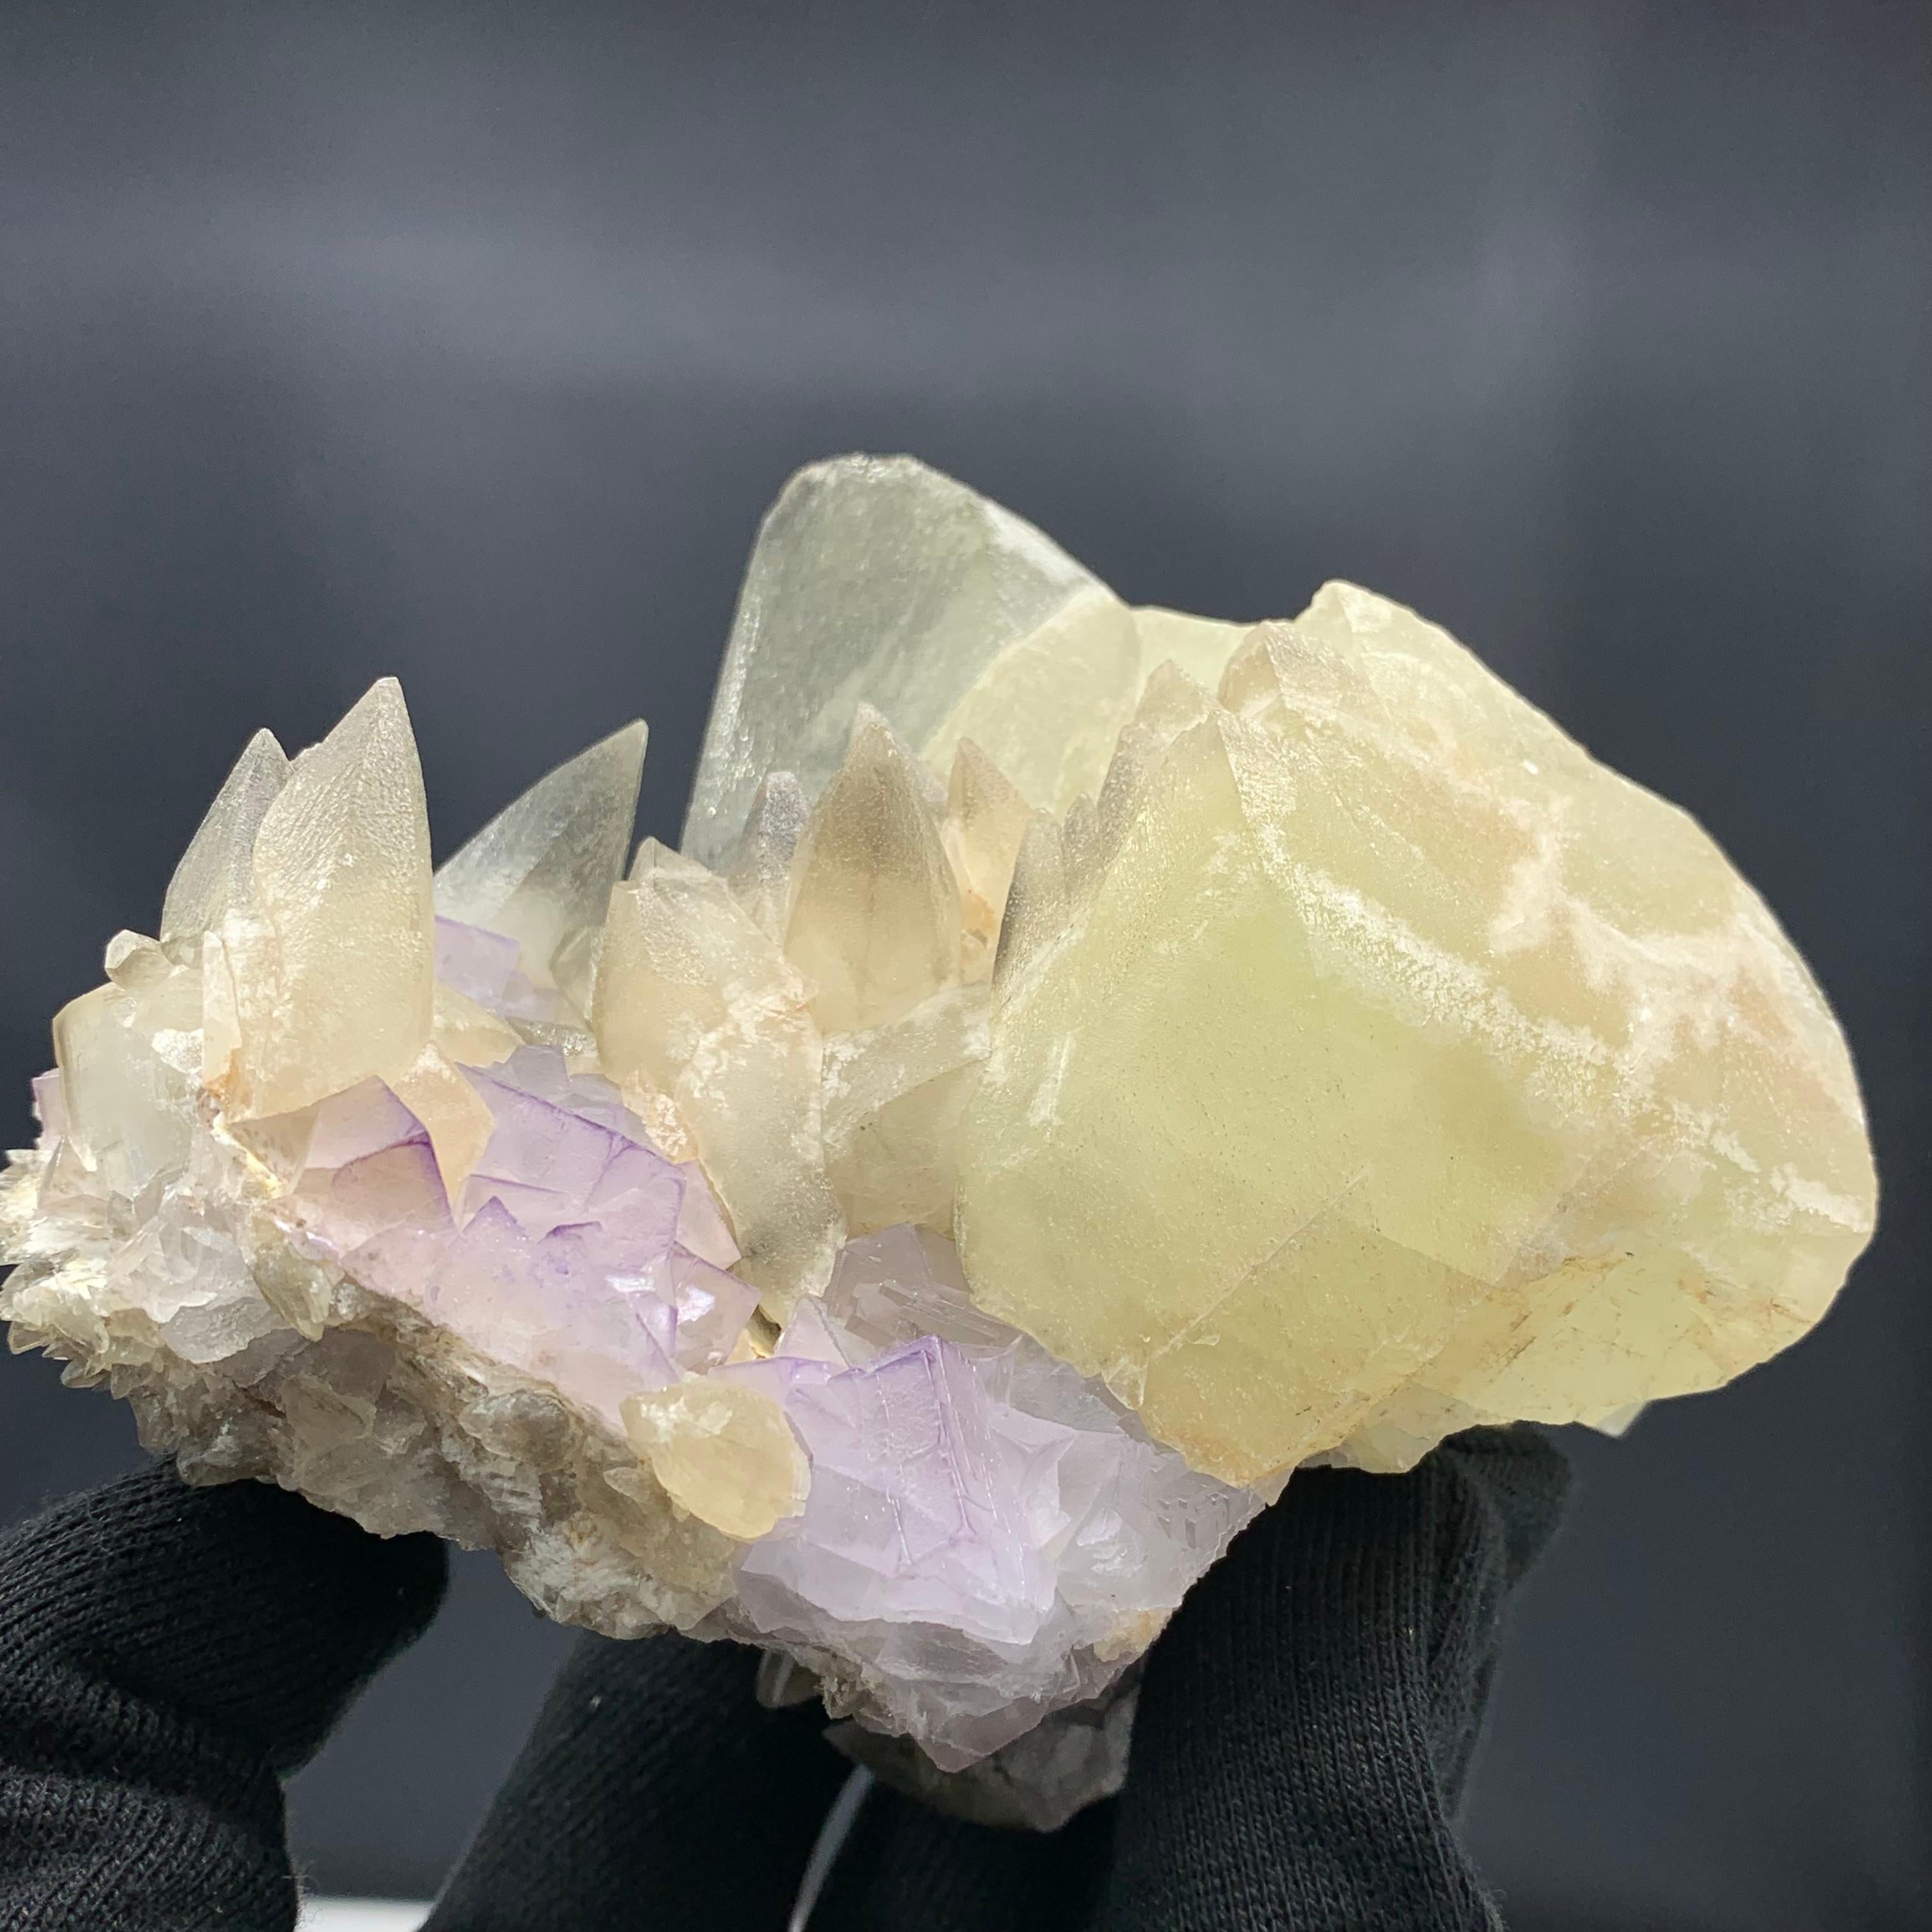 Glorious Calcite With Florite Bunch From Balochistan, Pakistan 

Weight: 980 Gram 
Dim: 8.9 x 12.9 x 7.9 Cm 
Origin: Balochistan, Pakistan 

Calcite is a carbonate mineral and the most stable polymorph of calcium carbonate. It is a very common